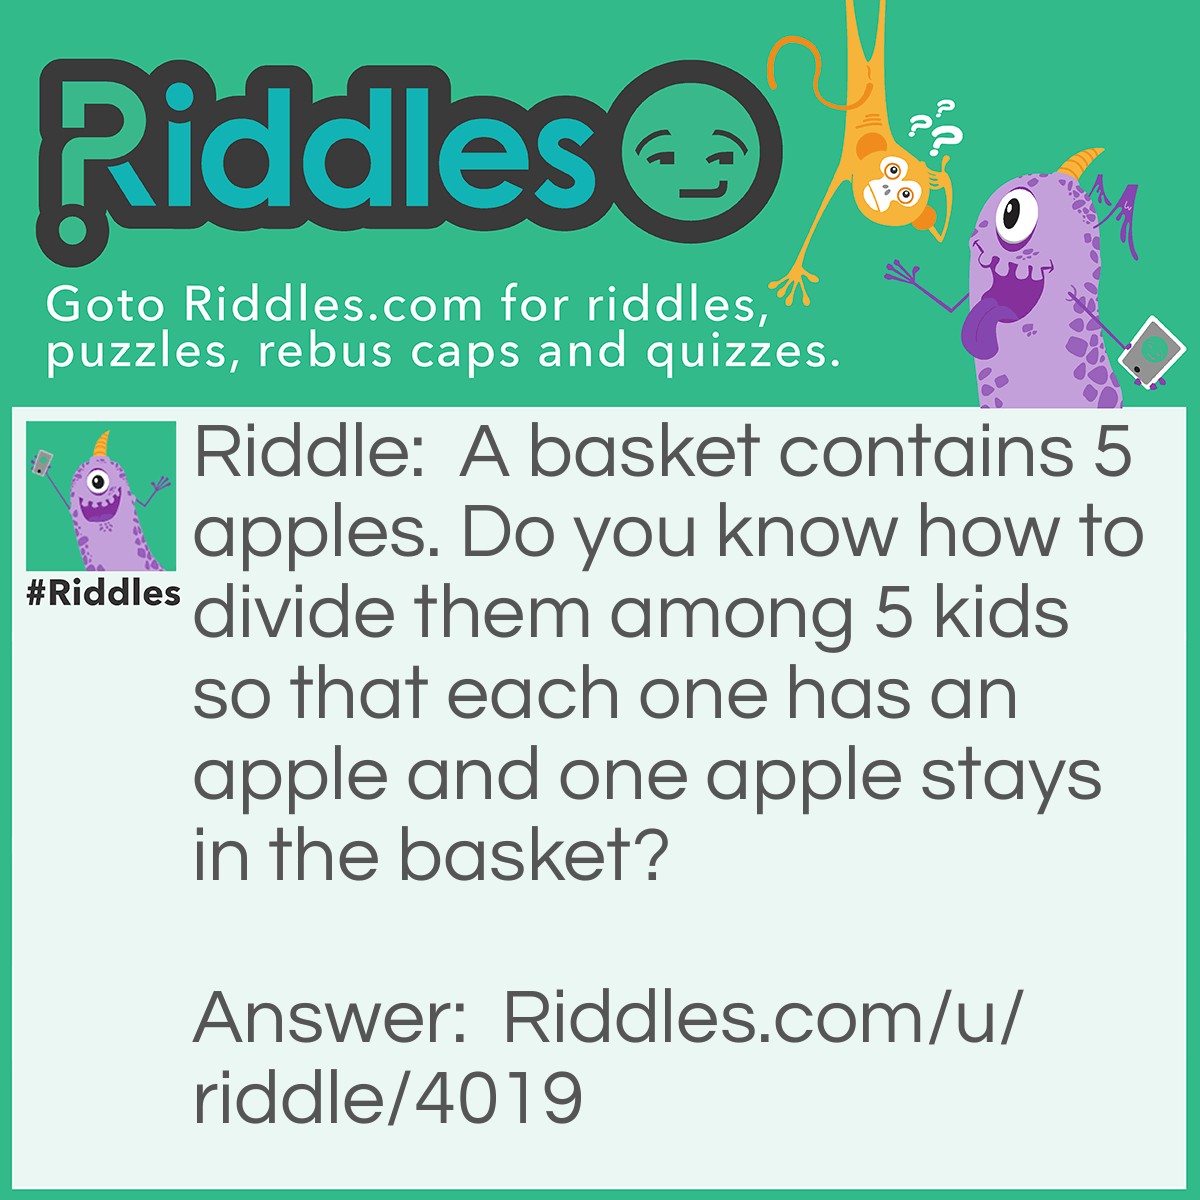 Riddle: A basket contains 5 apples. Do you know how to divide them among 5 kids so that each one has an apple and one apple stays in the basket? Answer: Answer to this riddle goes as follows: 4 kids get an apple (one apple for each one of them) and the fifth kid gets an apple with the basket still containing the apple.